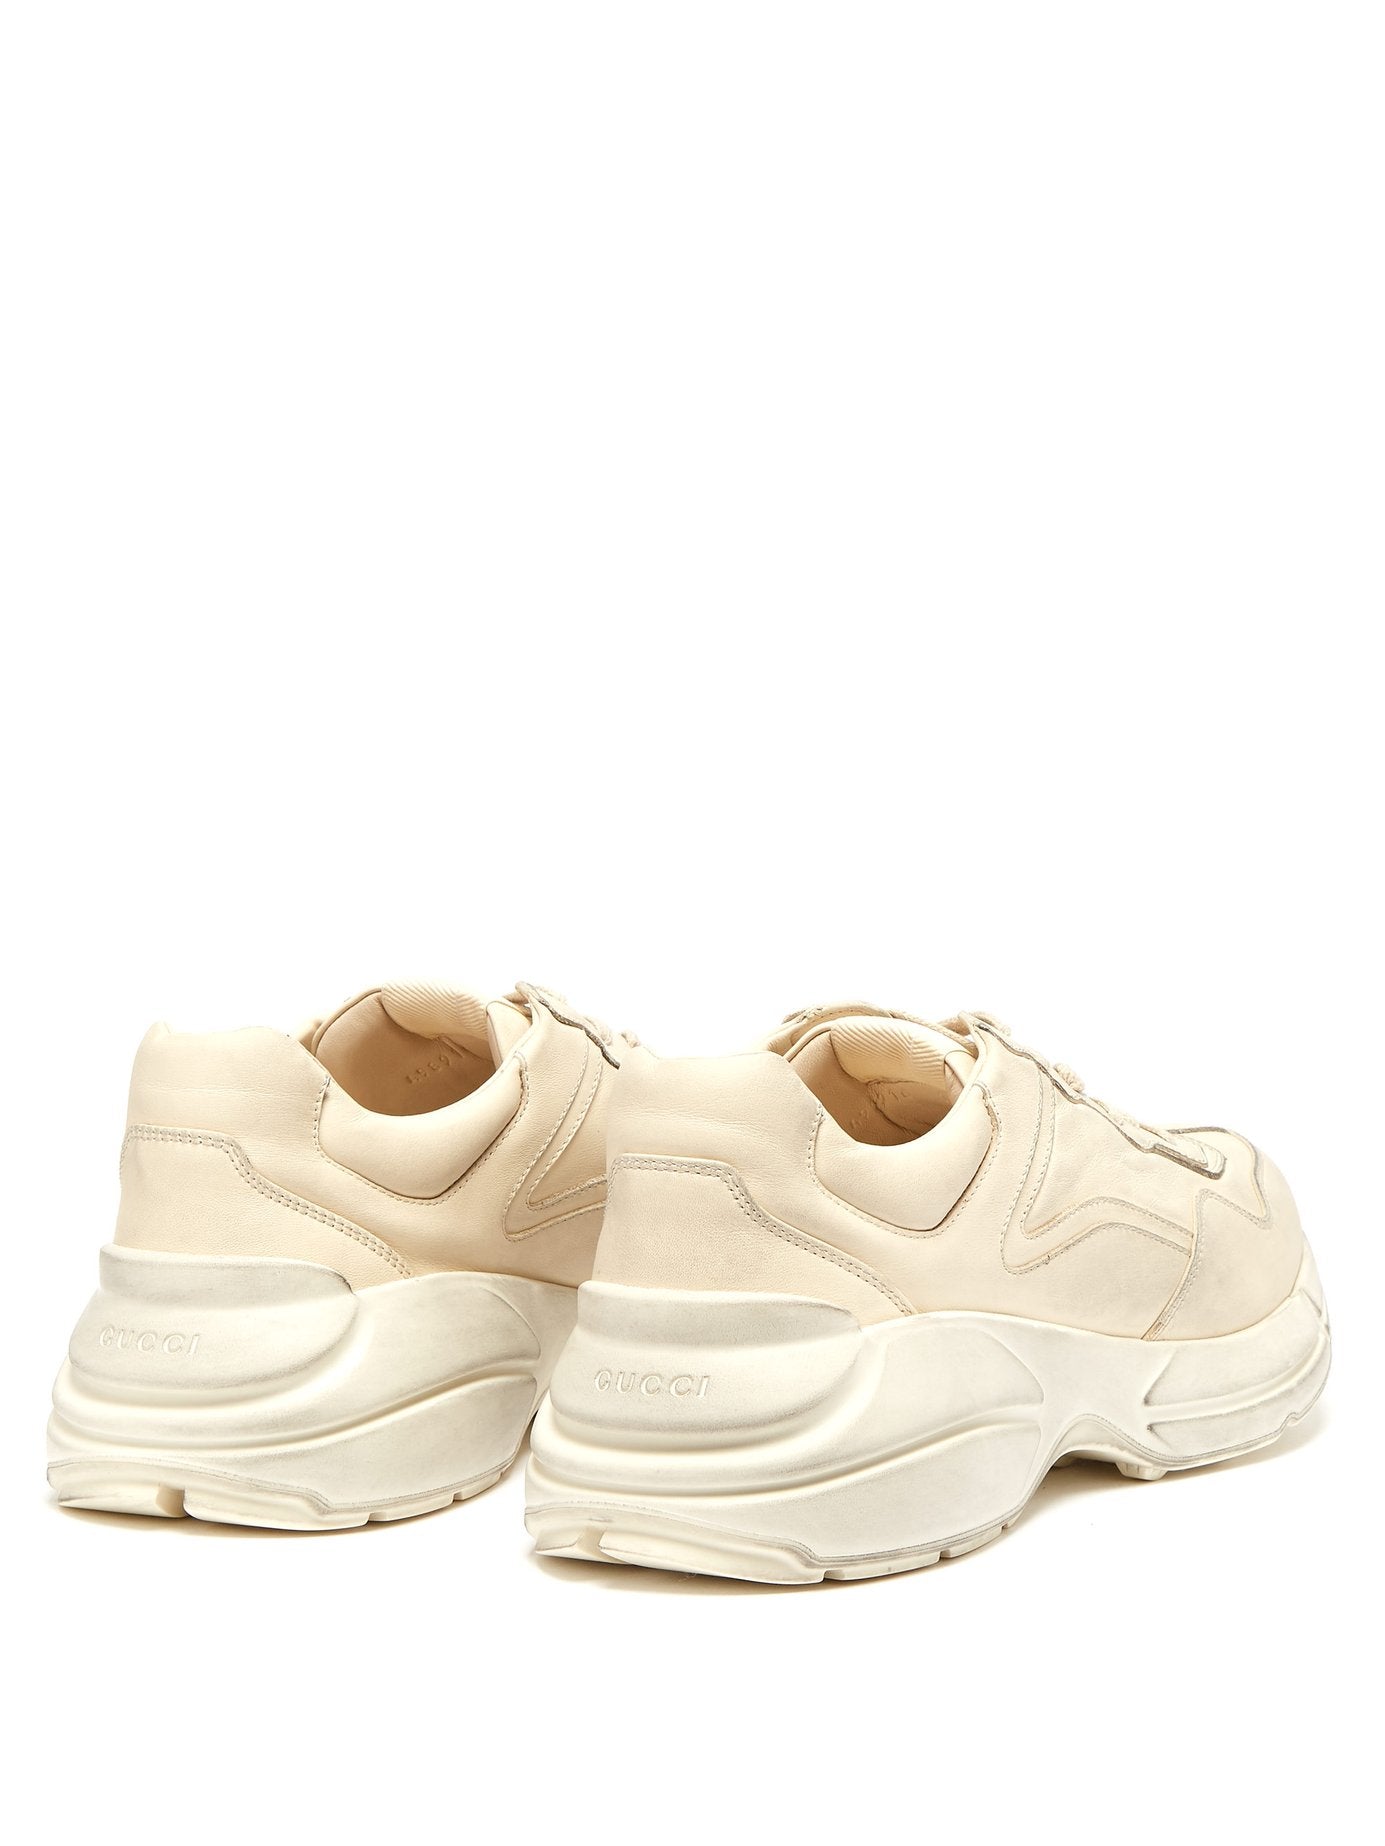 Gucci Rhyton Distressed Chunky Sneakers